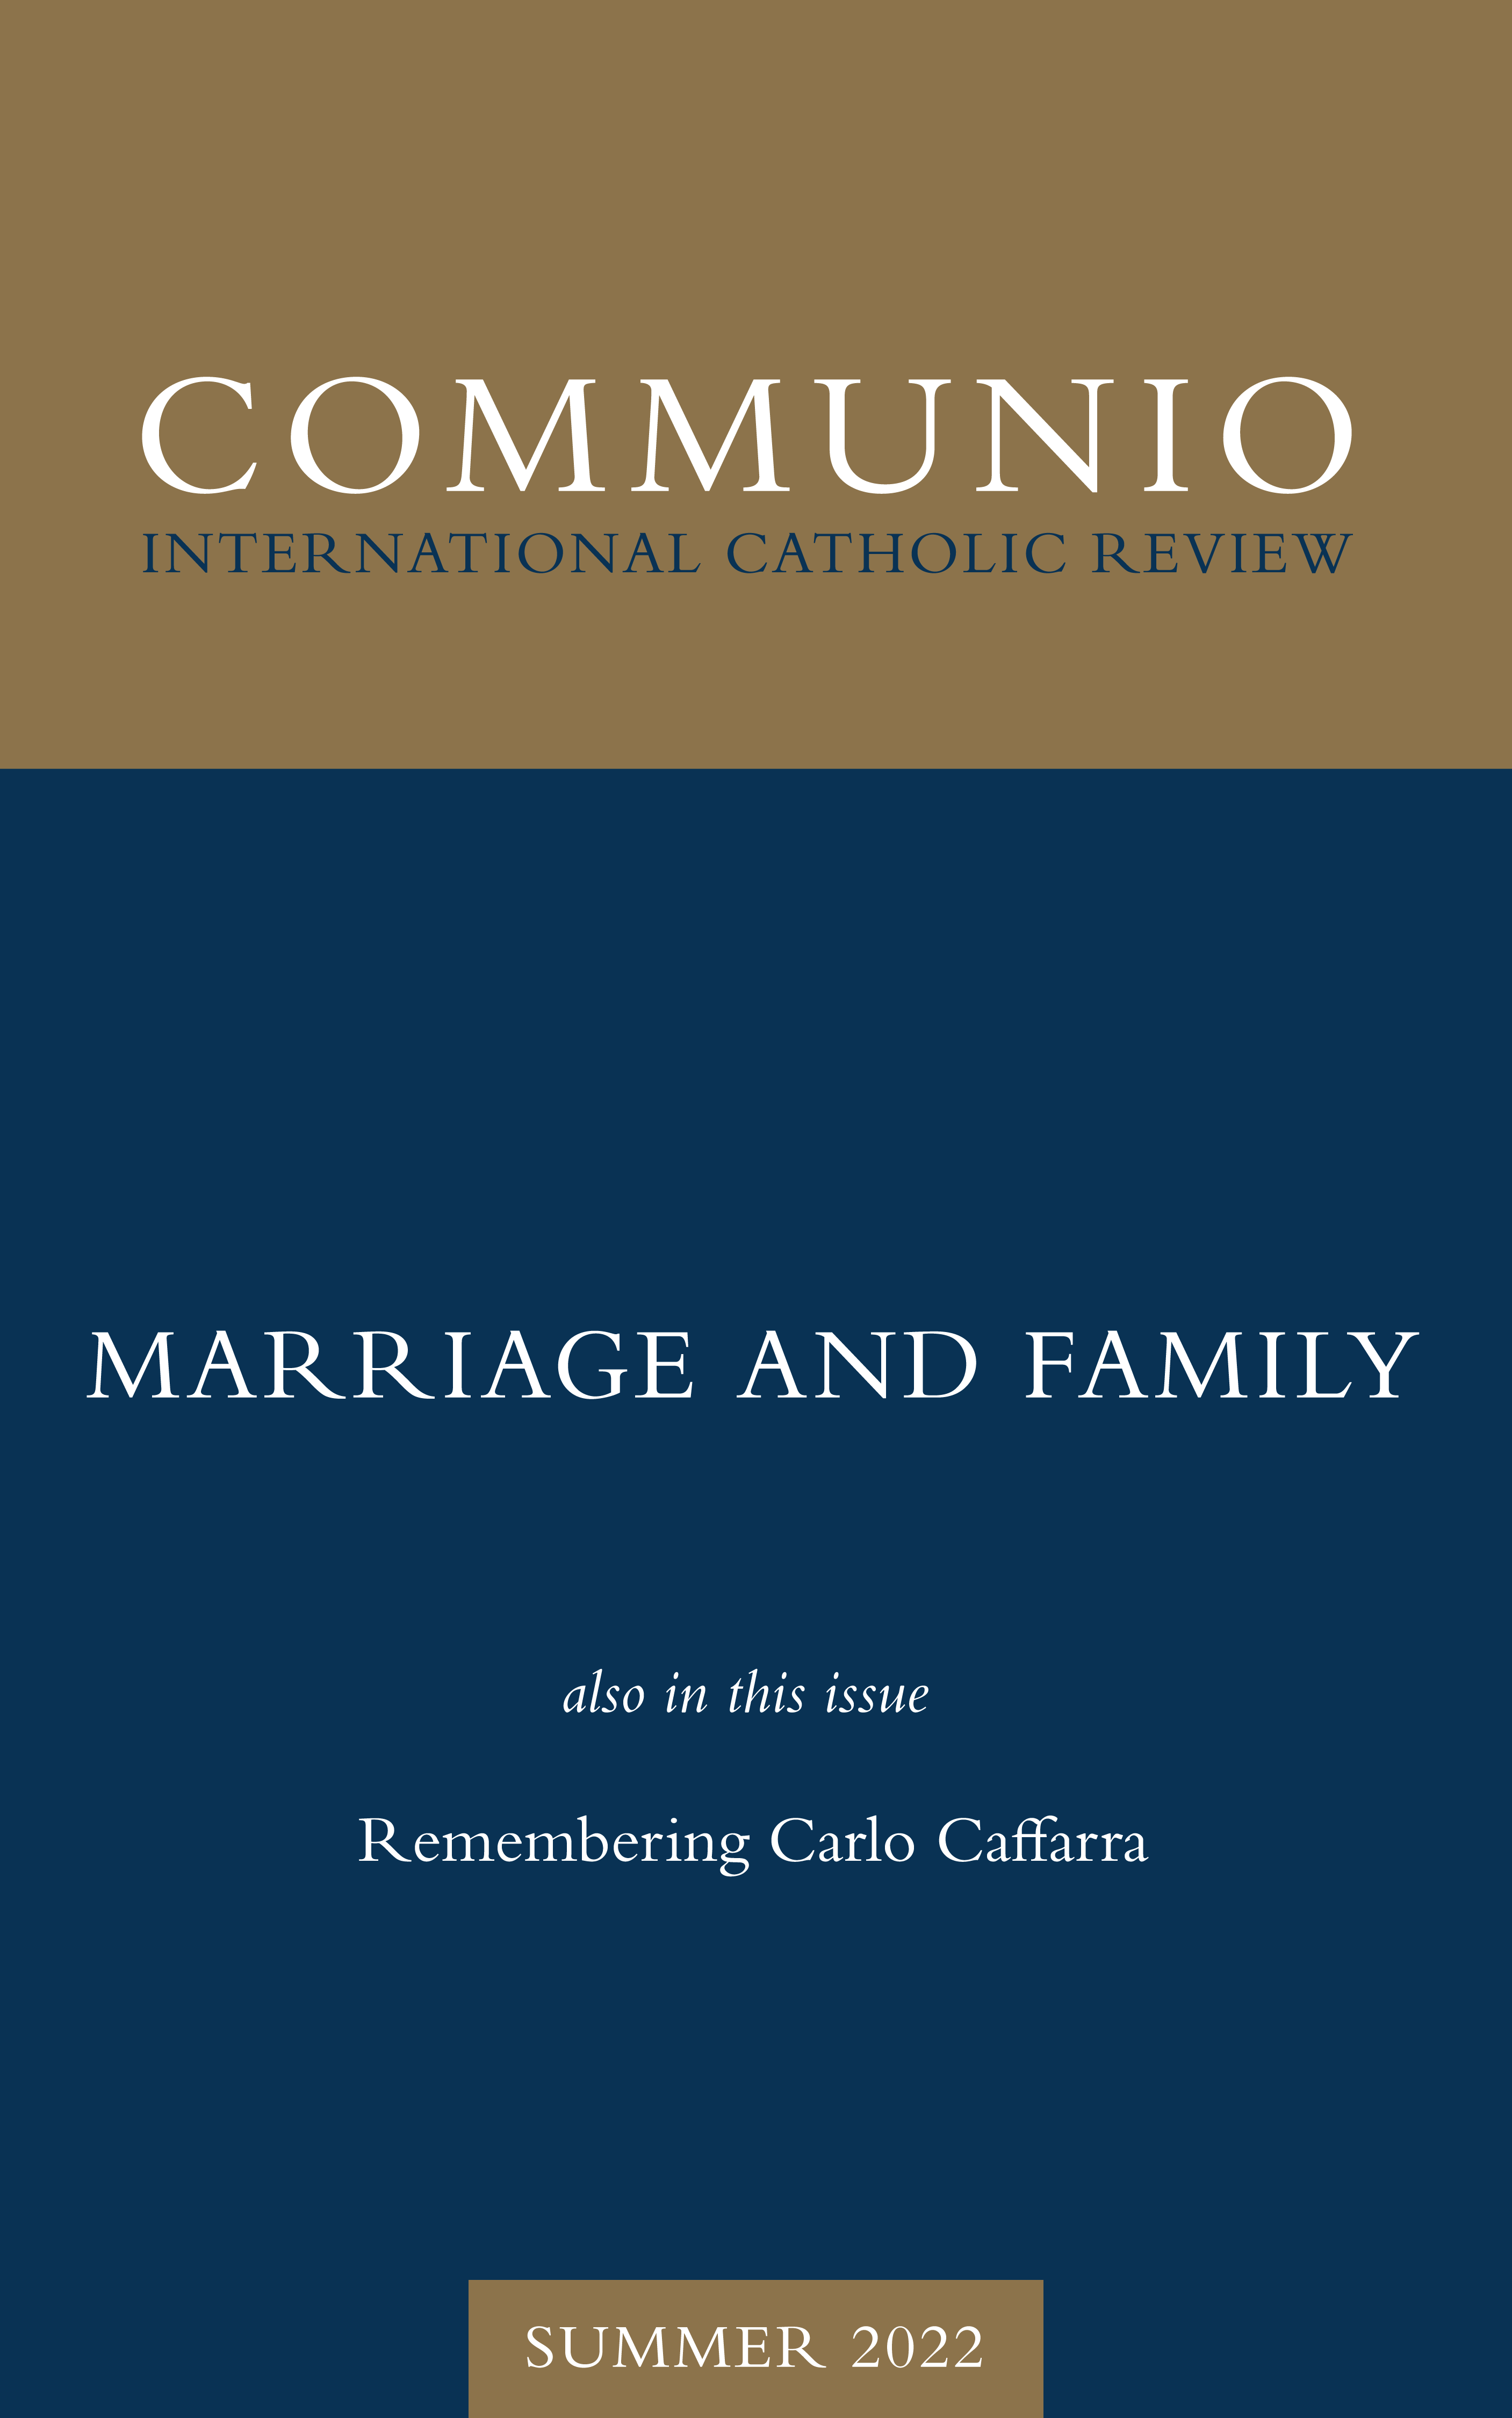 Communio - Summer 2022 - Marriage and Family